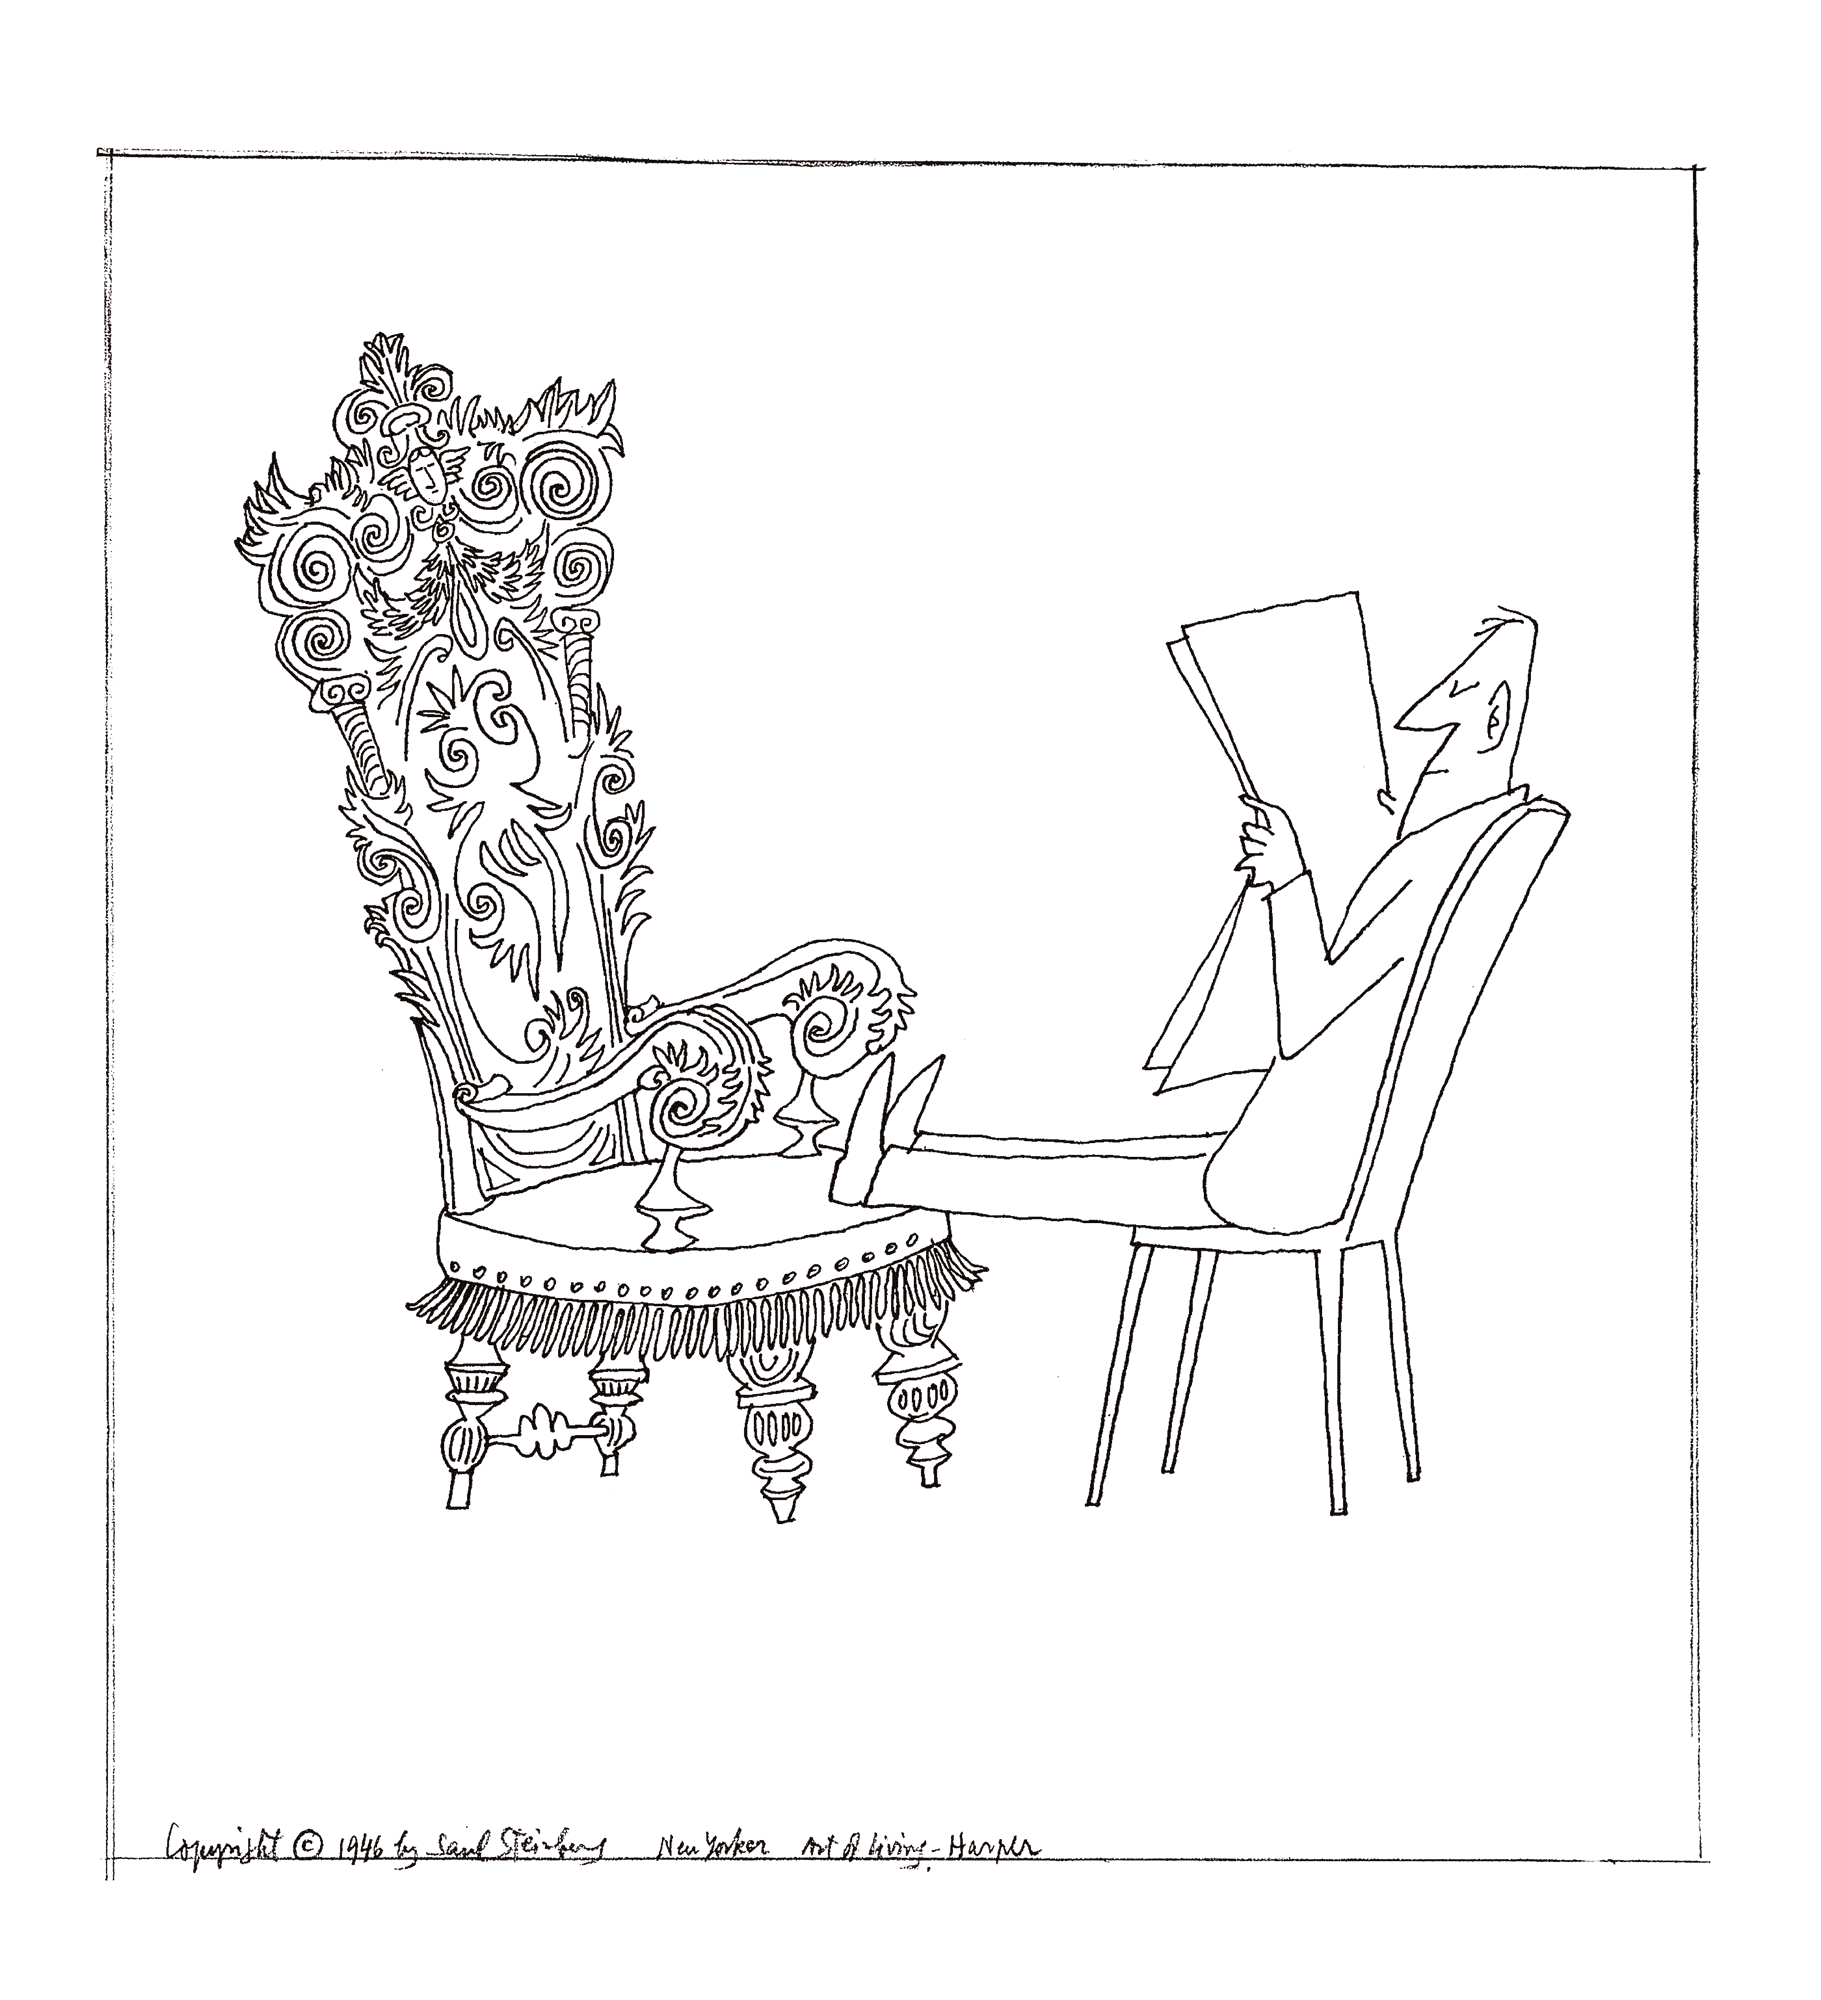 Original drawing for <em>The New Yorker</em>, October 12, 1946. <em>Feet on Chair</em>, ink over pencil on paper, 9 1/8 x 9 ¼ in. Private collection.